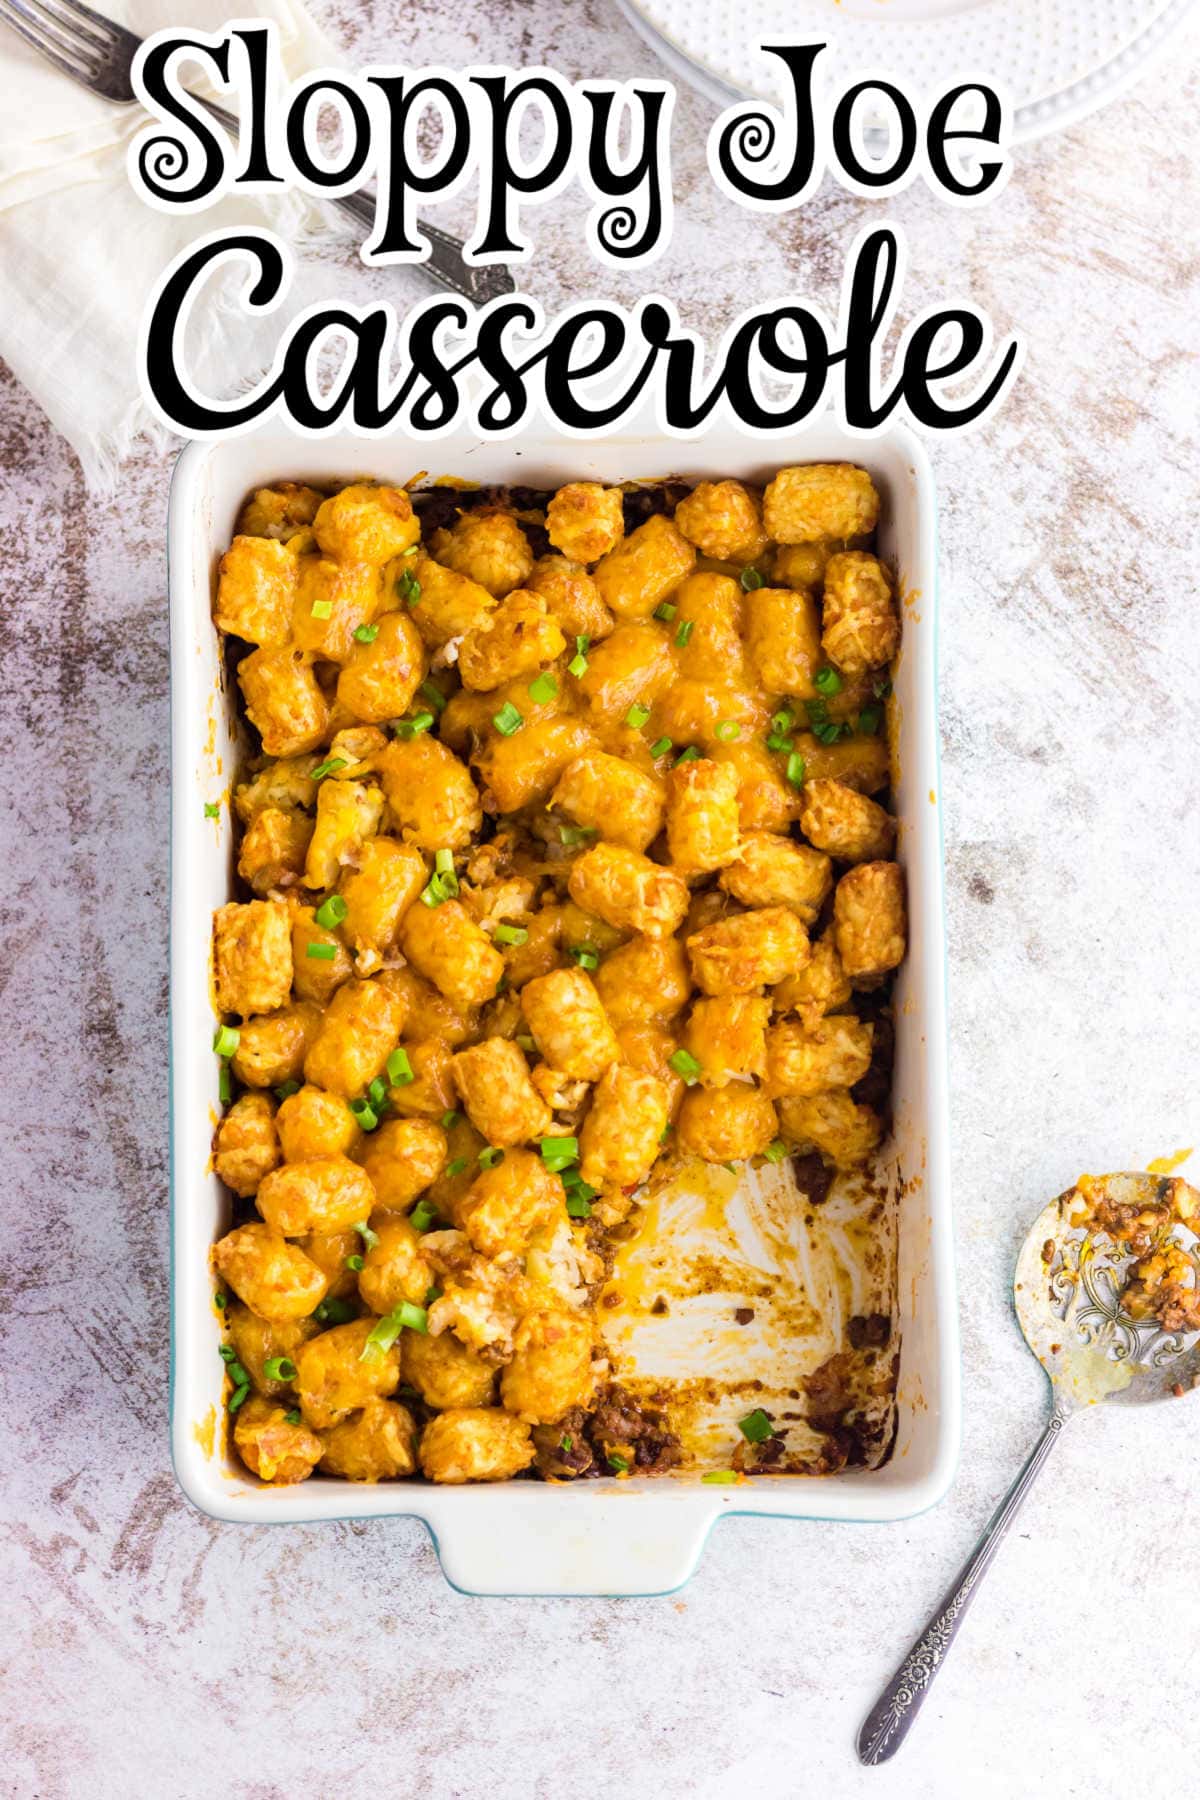 Overhead view of the casserole with title text.